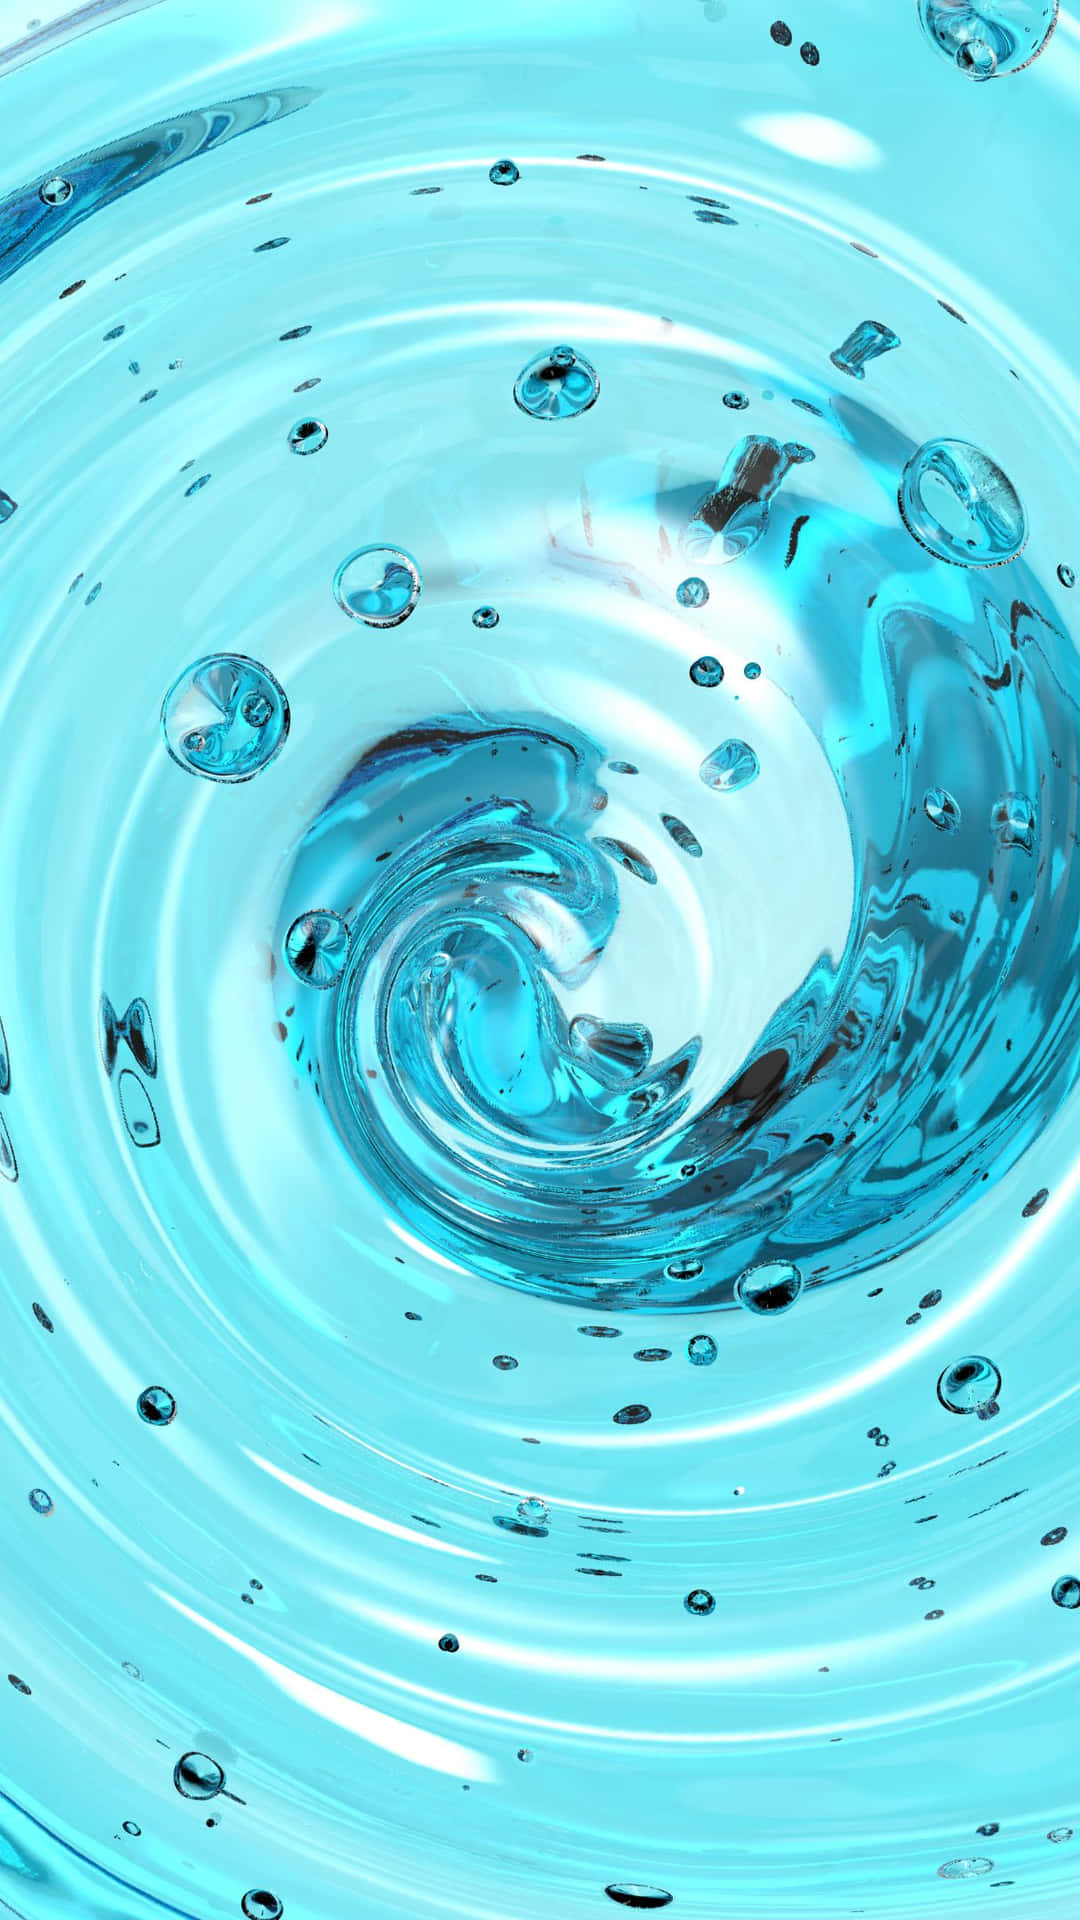 An Abstract Look at Blue Swirls